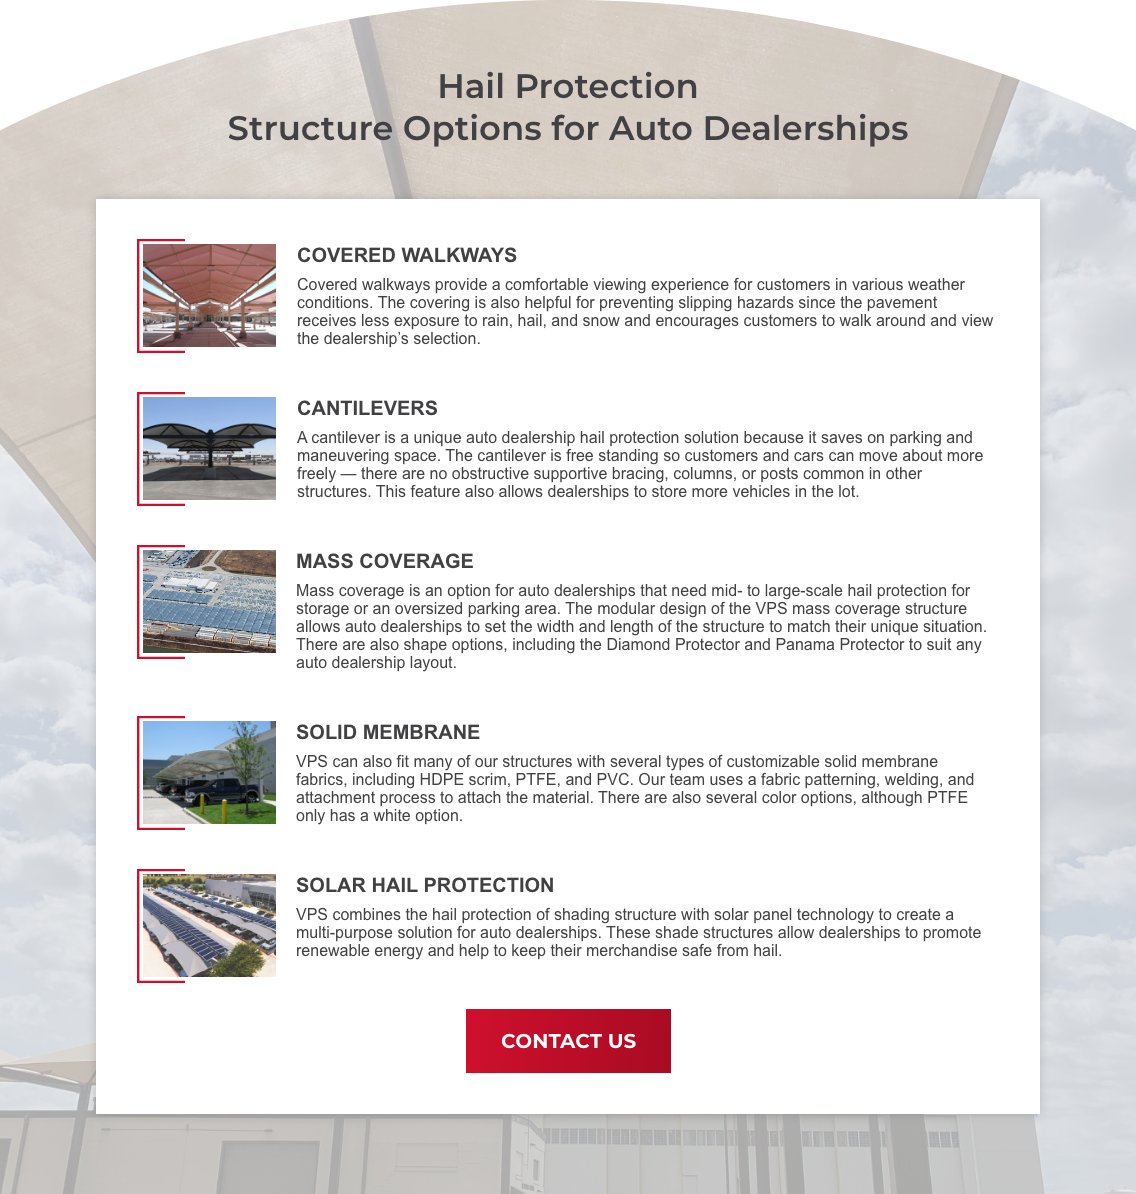 Hail Protection Options